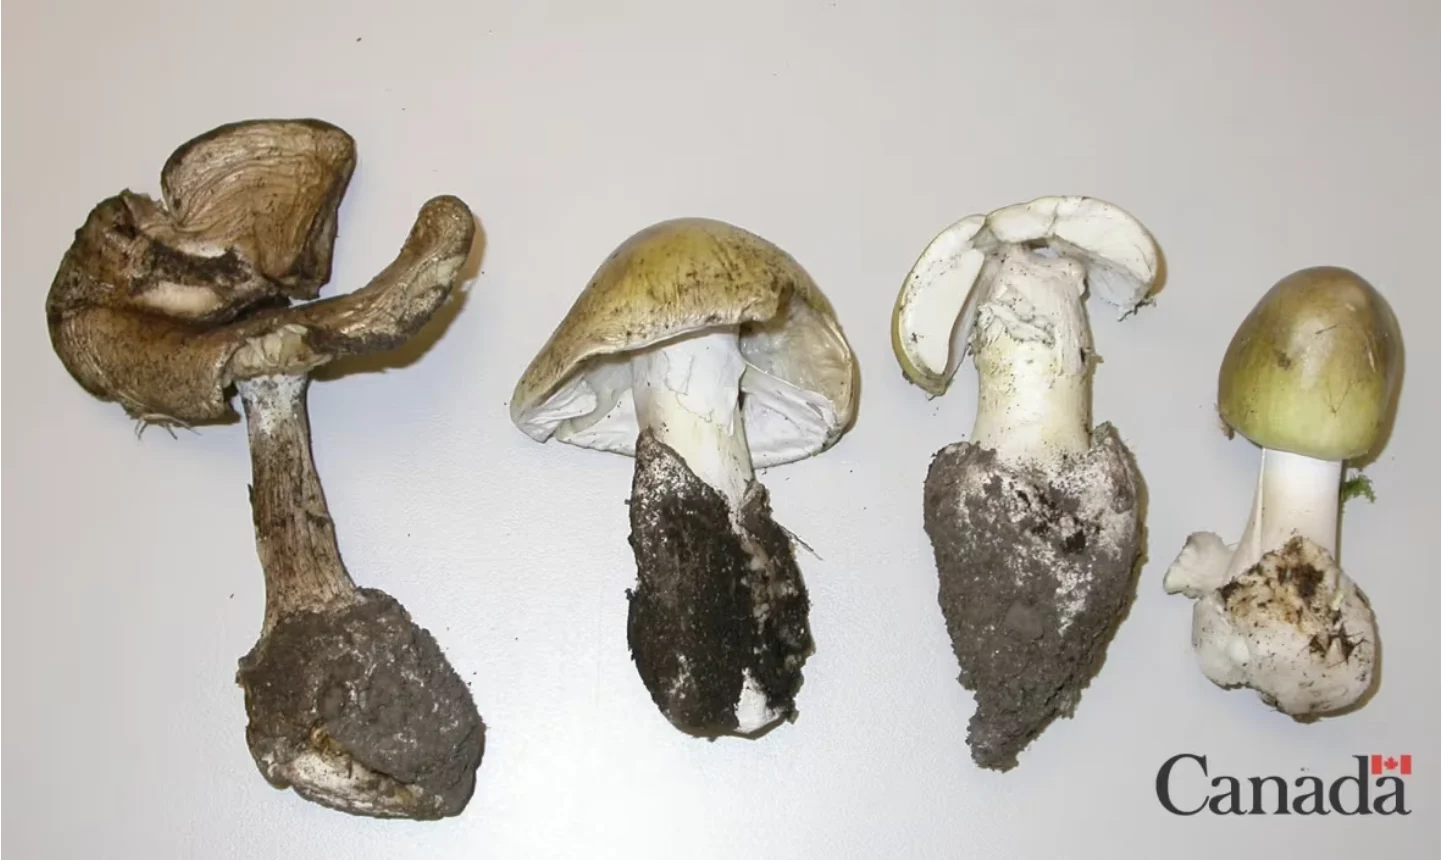 Natural Resources Canada/Canadian Forest Service: The death cap mushroom starts as a button-shaped bulb and opens into a flat-capped mushroom that turns darker brown-green as it matures. (Natural Resources Canada/Canadian Forest Service)